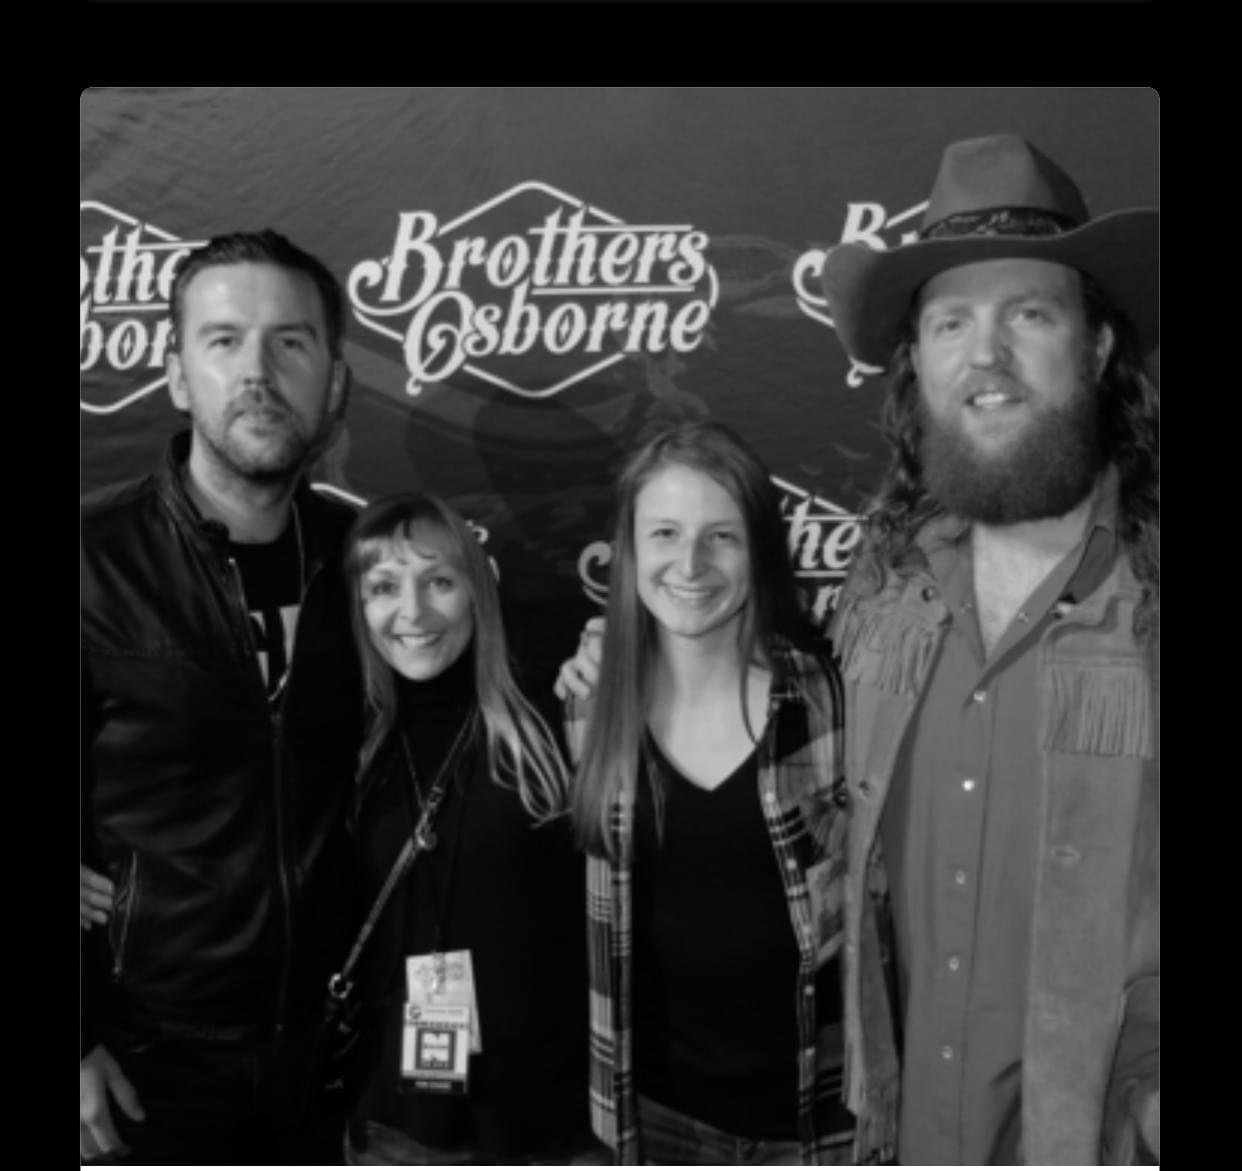 Nash New Tune At Noon 8-27-20  –  Brothers Osborne  “All Night”